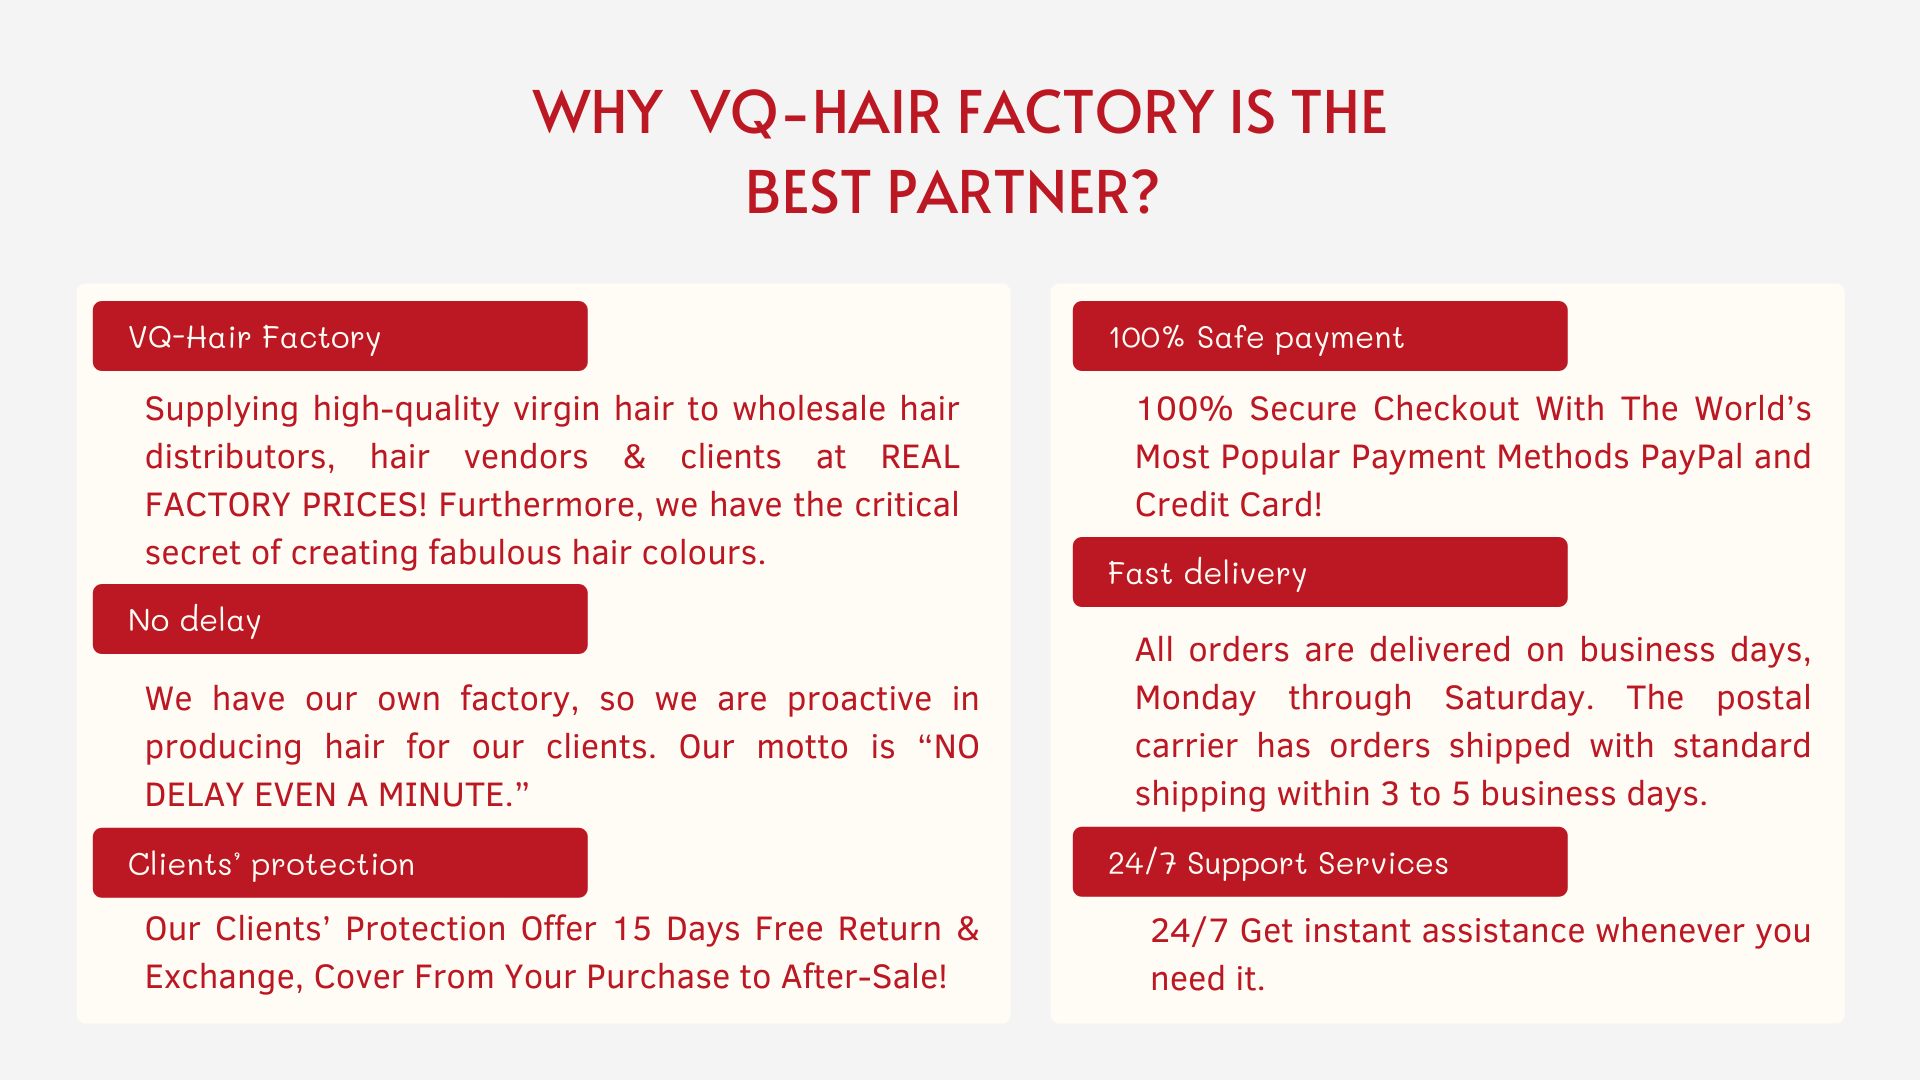 About VQ Hair Factory